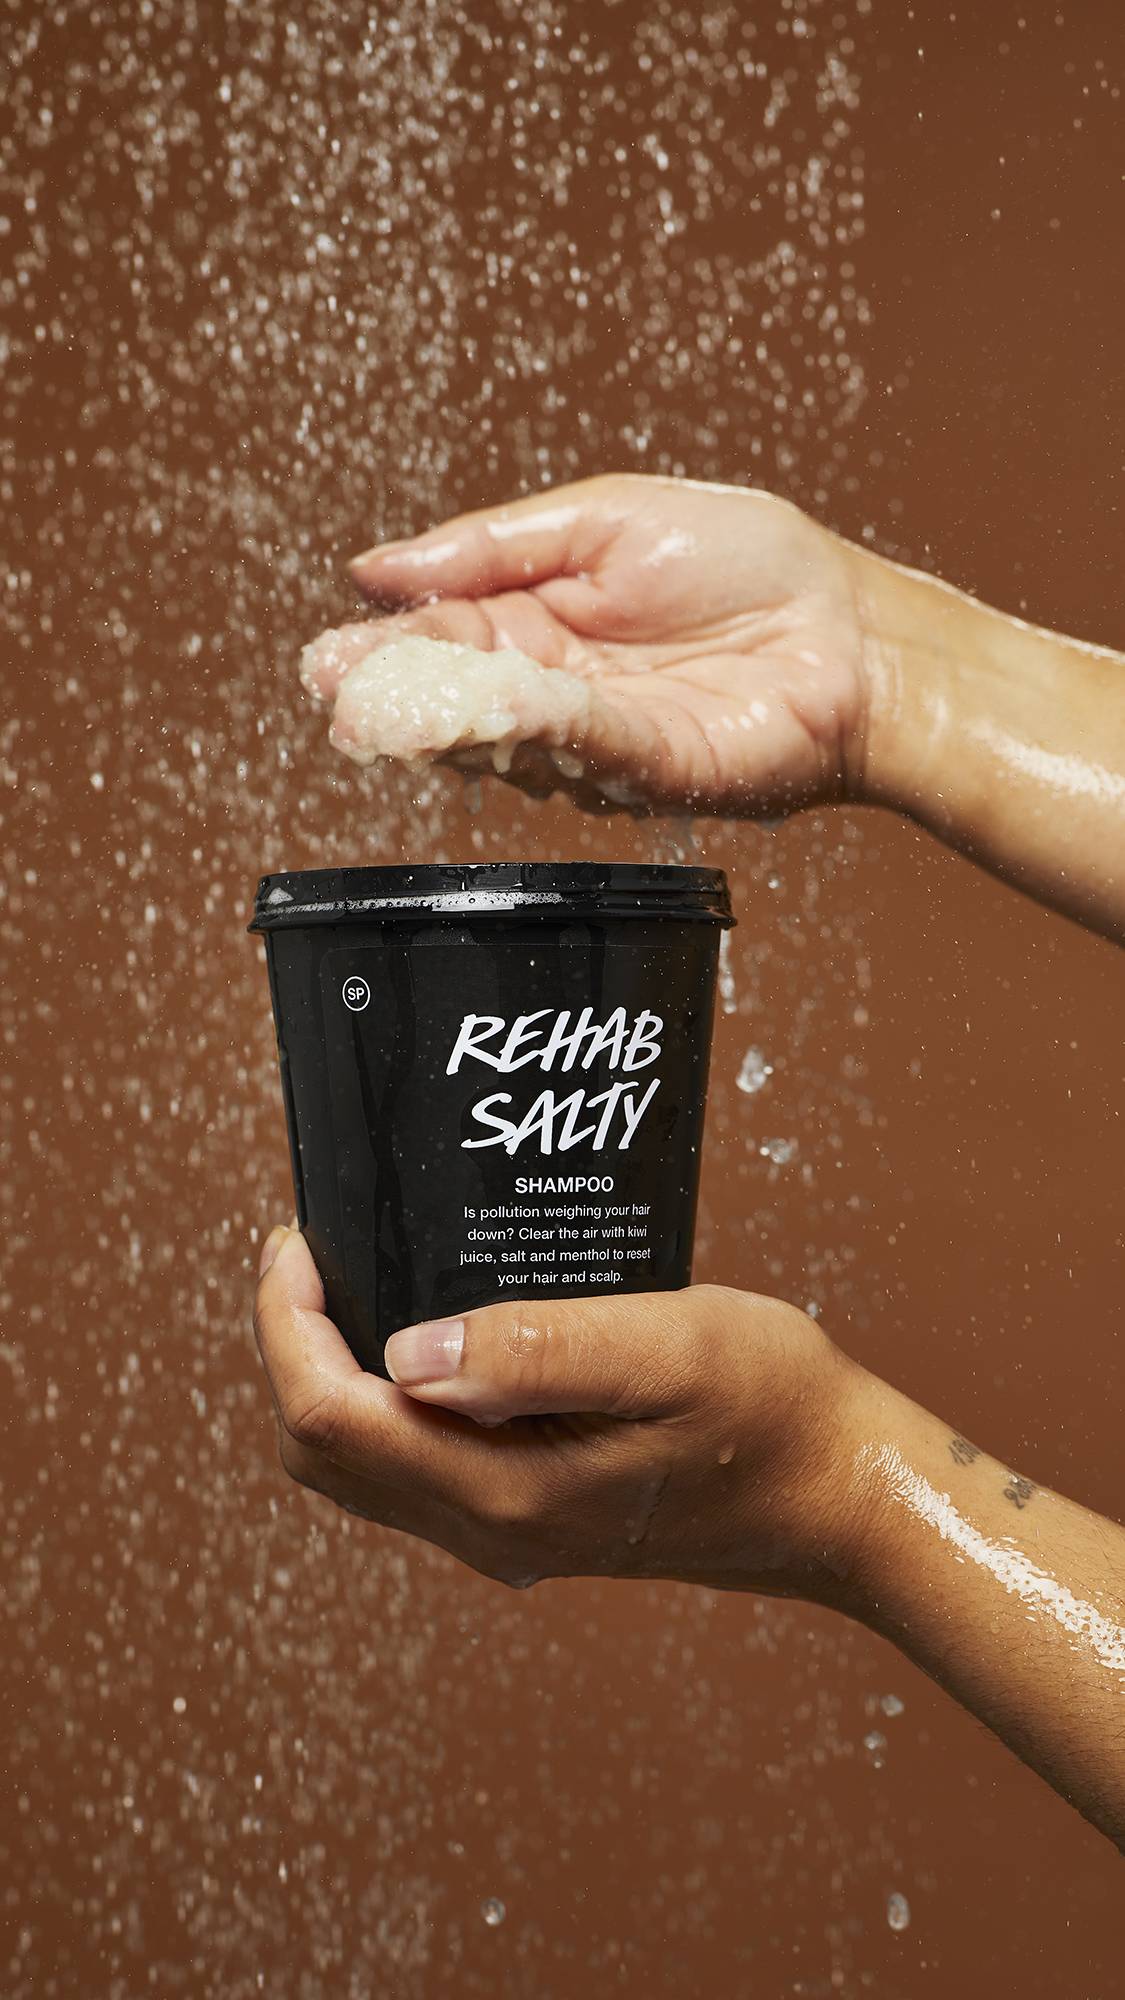 A Close-up image of the Rehab Salty in a LUSH black pot under falling shower water as the model scoops out the product.